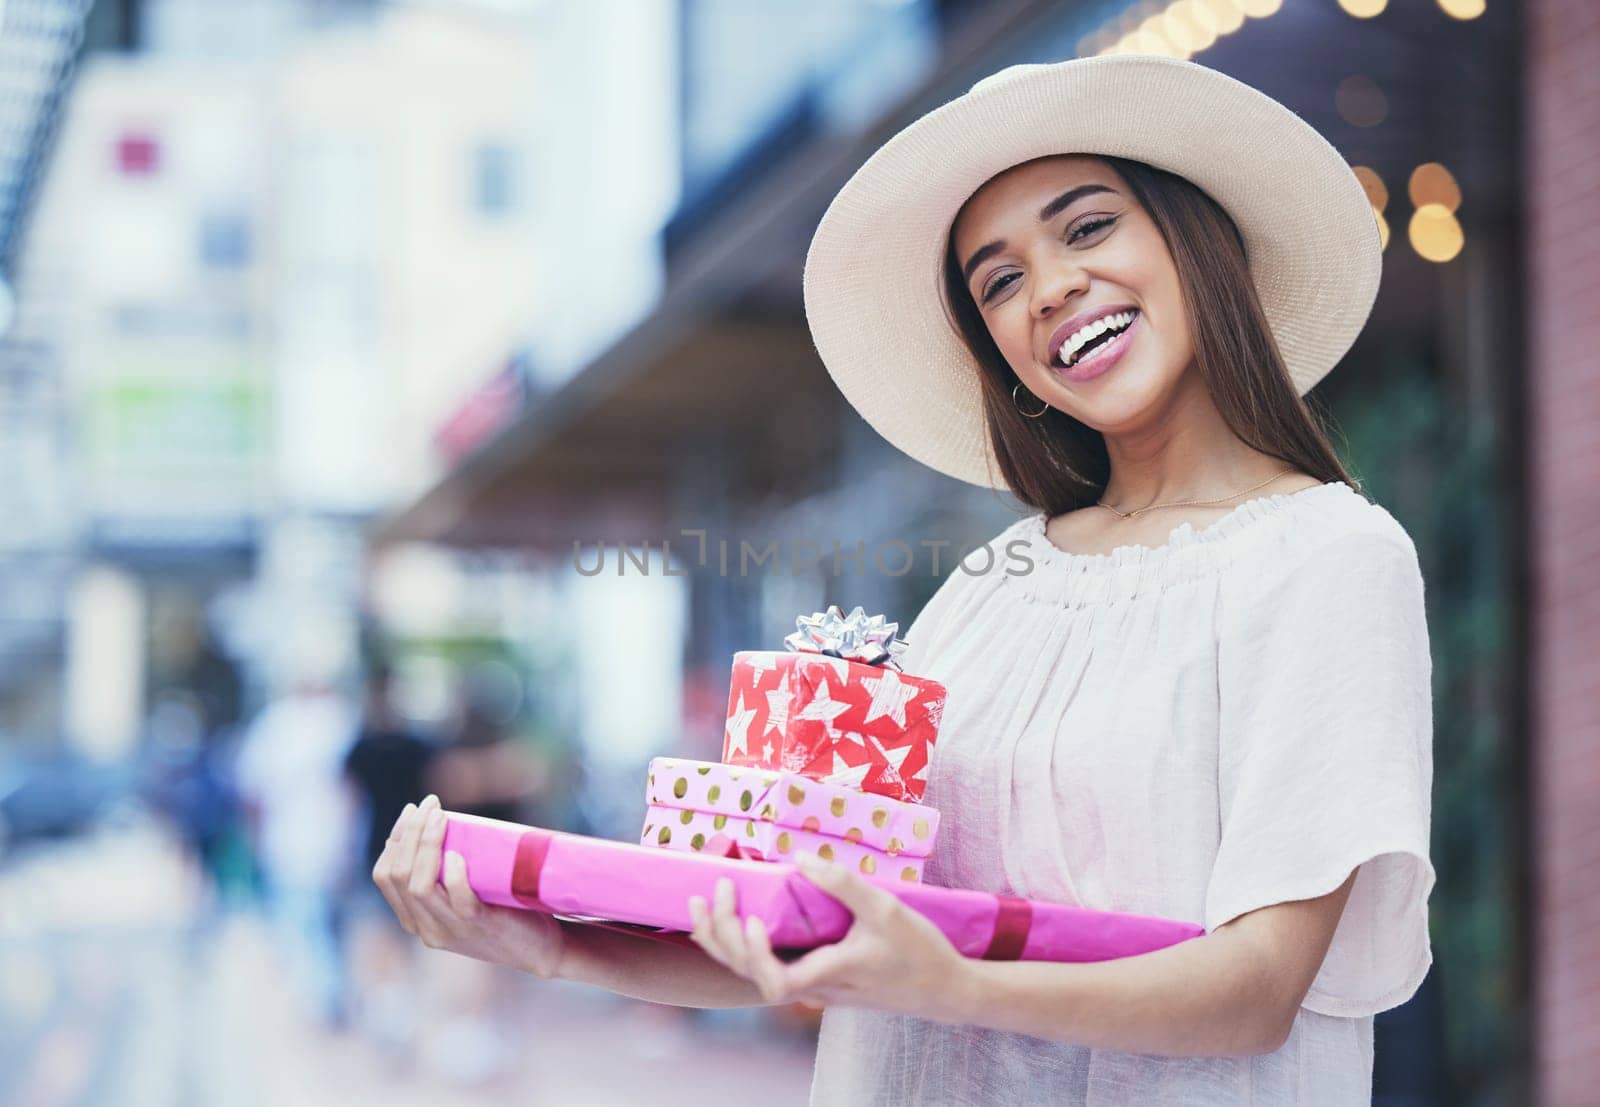 Gifts, boxes and portrait of a woman in a shopping mall buying products for a party, event or celebration. Happy, smile and female purchasing presents for valentines day, anniversary or romance